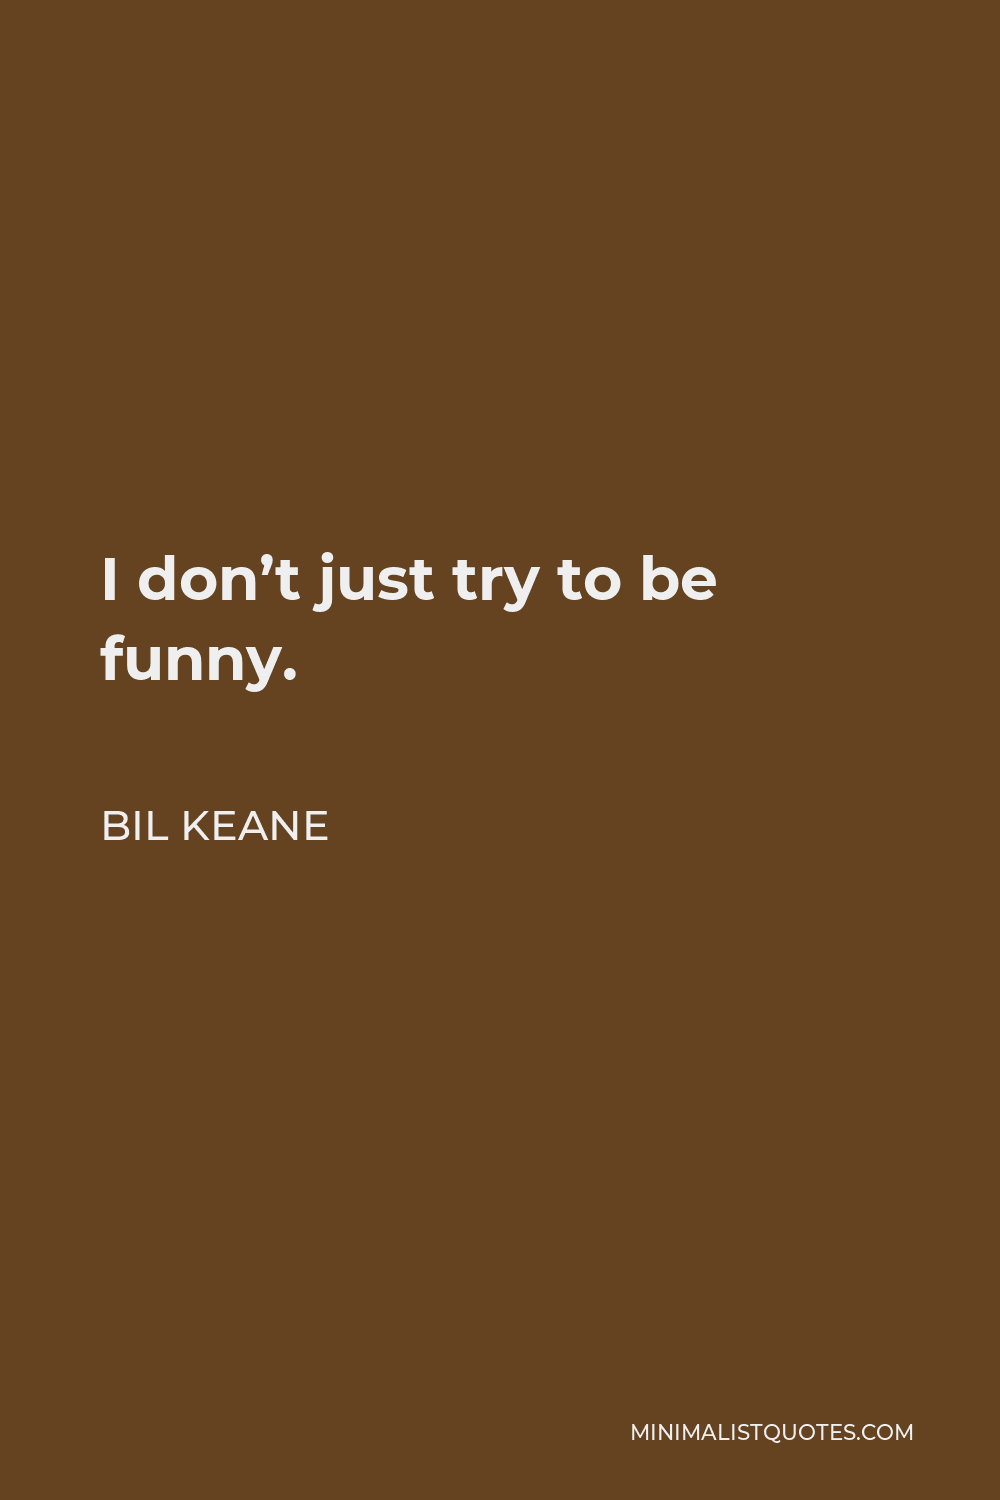 Bil Keane Quote - I don’t just try to be funny.